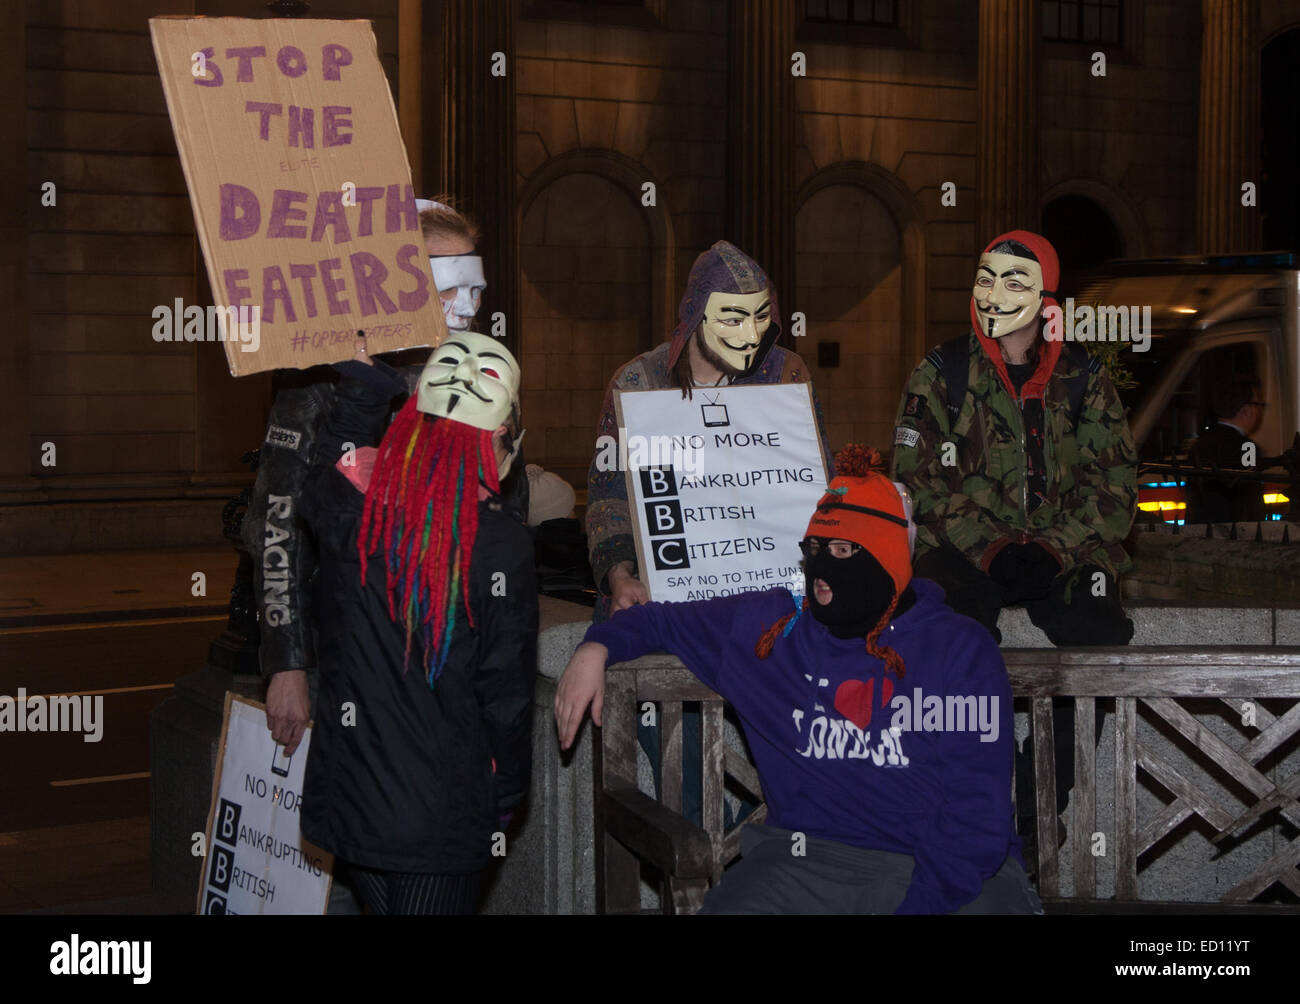 London, UK. 23rd Dec, 2014. Online activism group Anonymous march through London from the City to the BBC's HQ on Great Portland Street in protest against alleged biases and coverups of a 'paedophile ring'. PICTURED: A protester's banner demands that the 'Death Eaters' be stopped. Credit:  Paul Davey/Alamy Live News Stock Photo